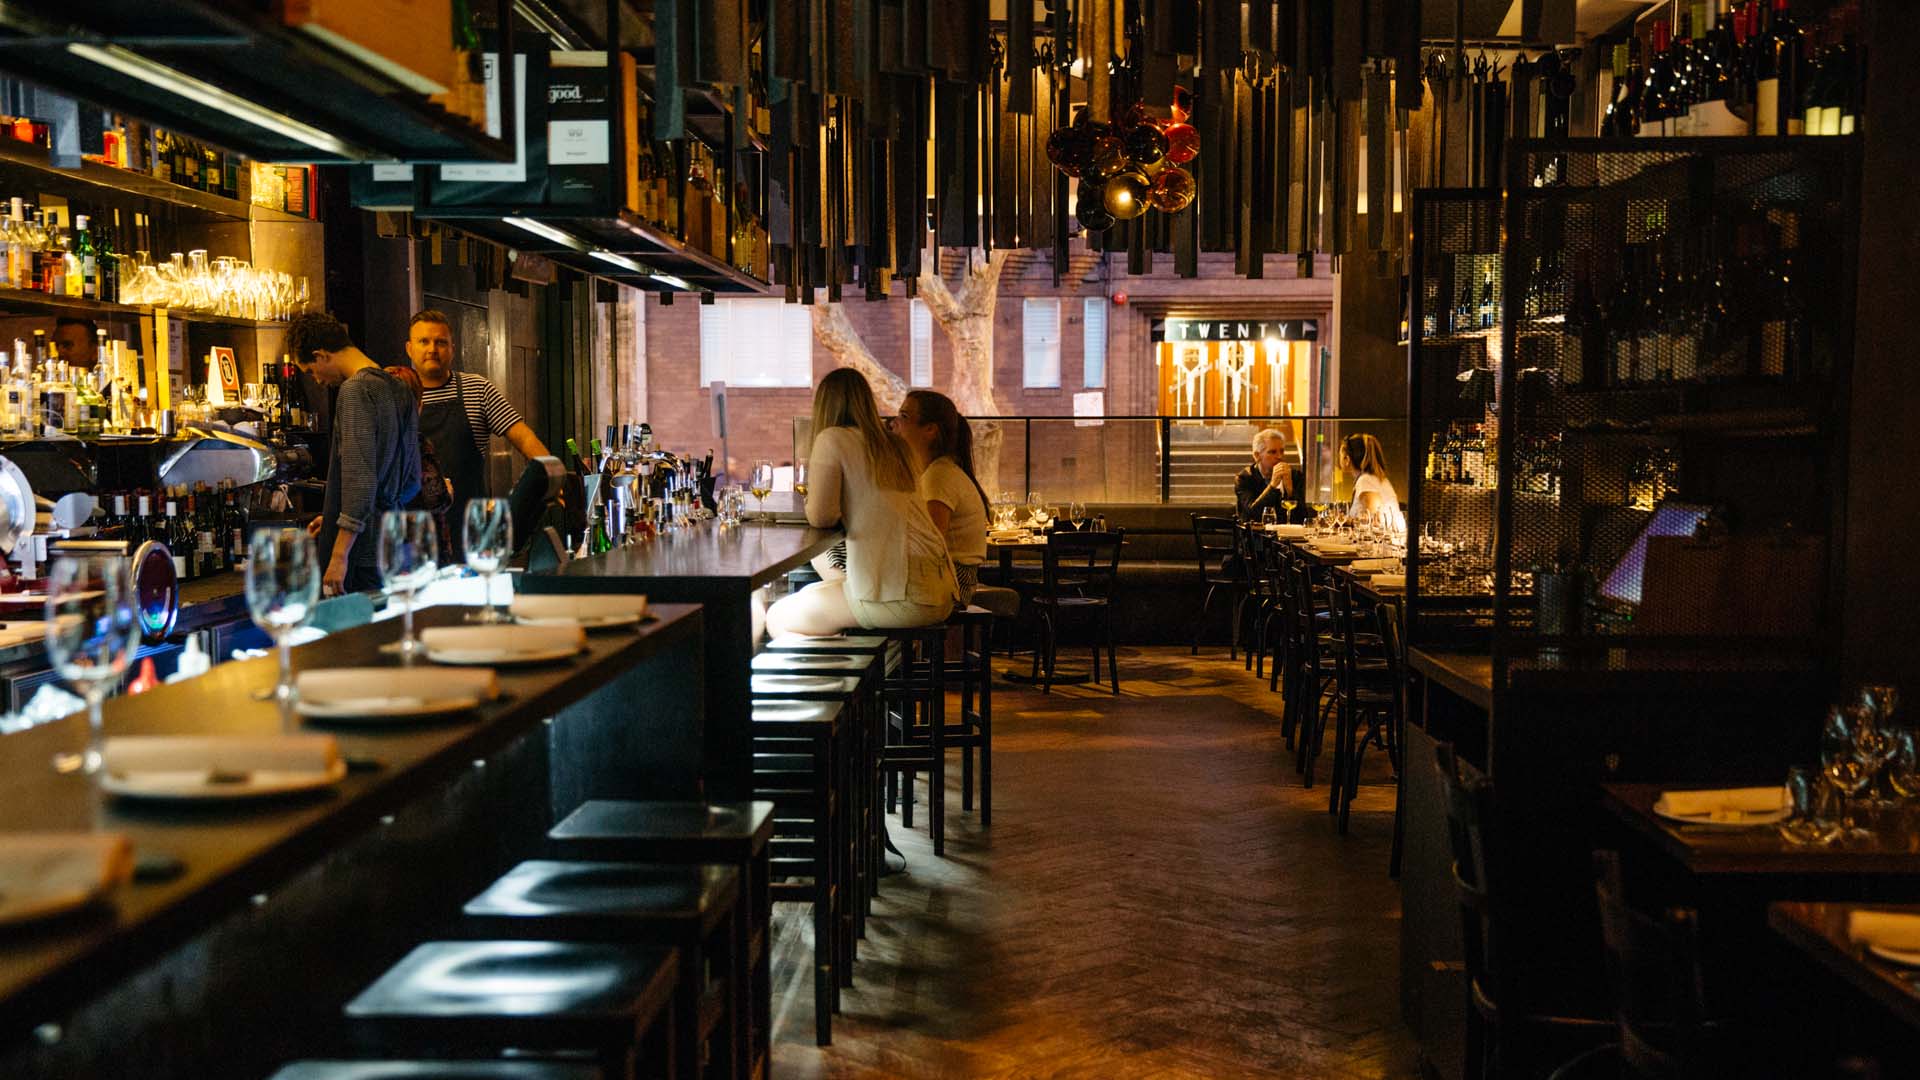 Sydney's Award-Winning Wine Bar Monopole Is Relocating to the CBD This October